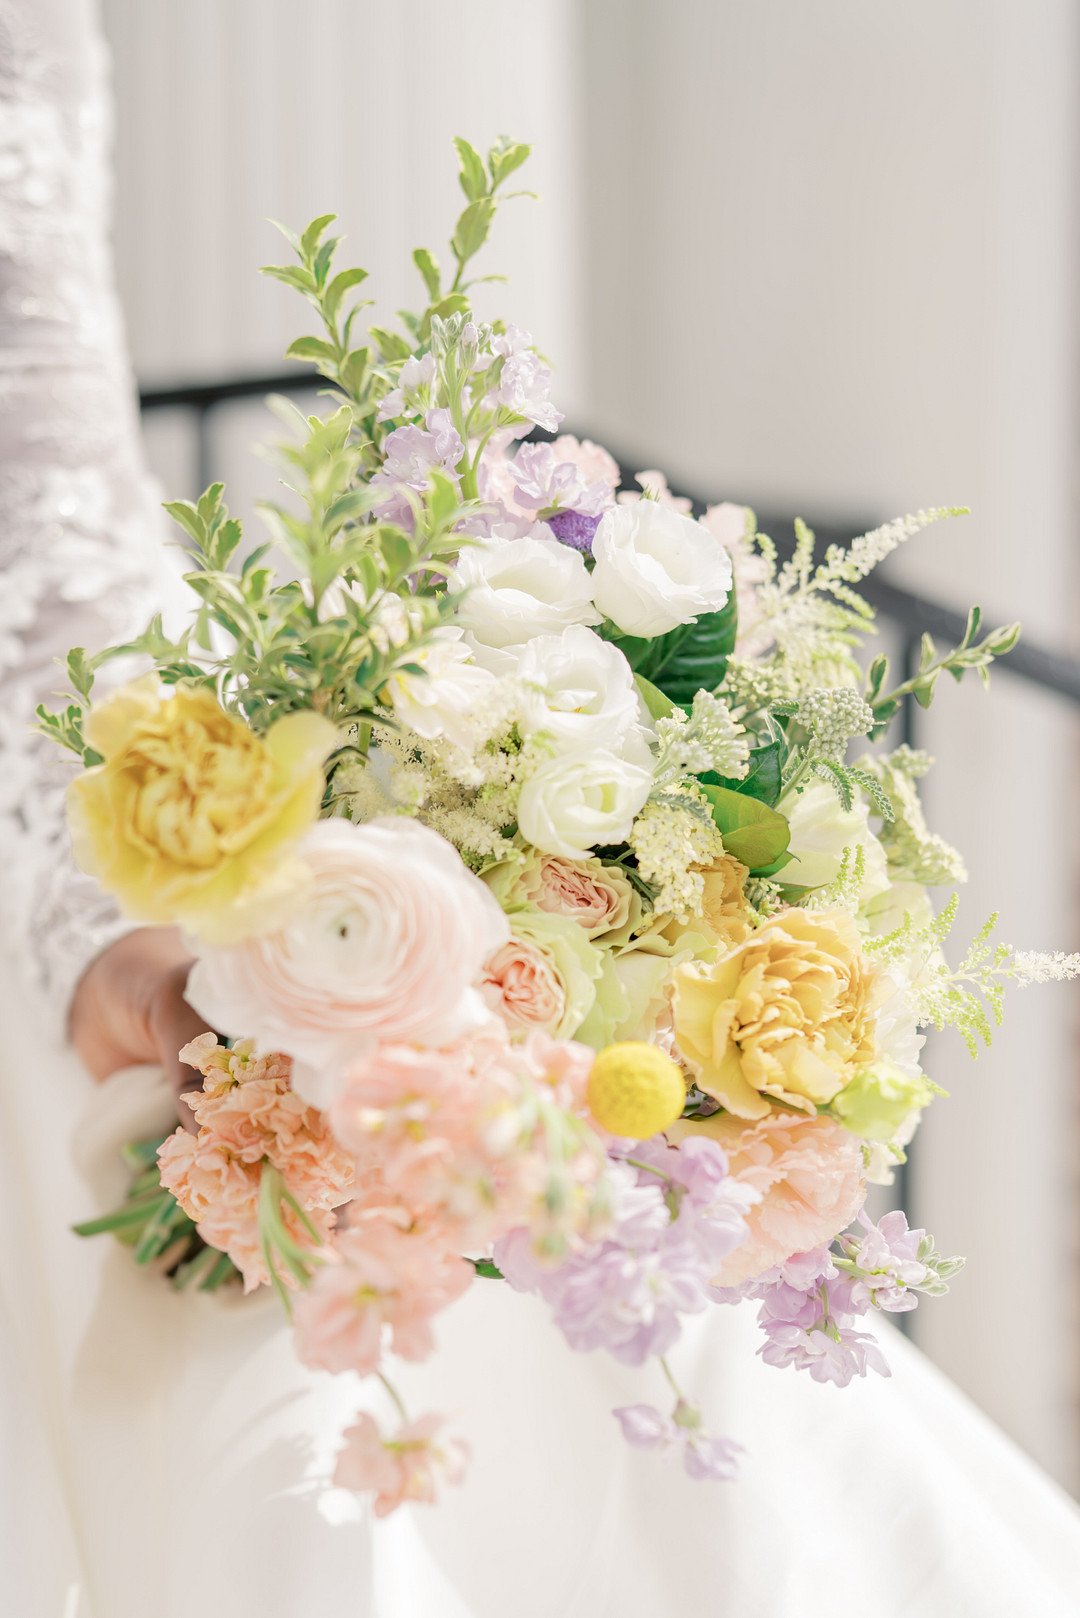 A Southern editorial with a painterly flow, inspired by the impressionist style of Claude Monet_Jessica Blackburn Photography, llc_DSC05206_low.jpg